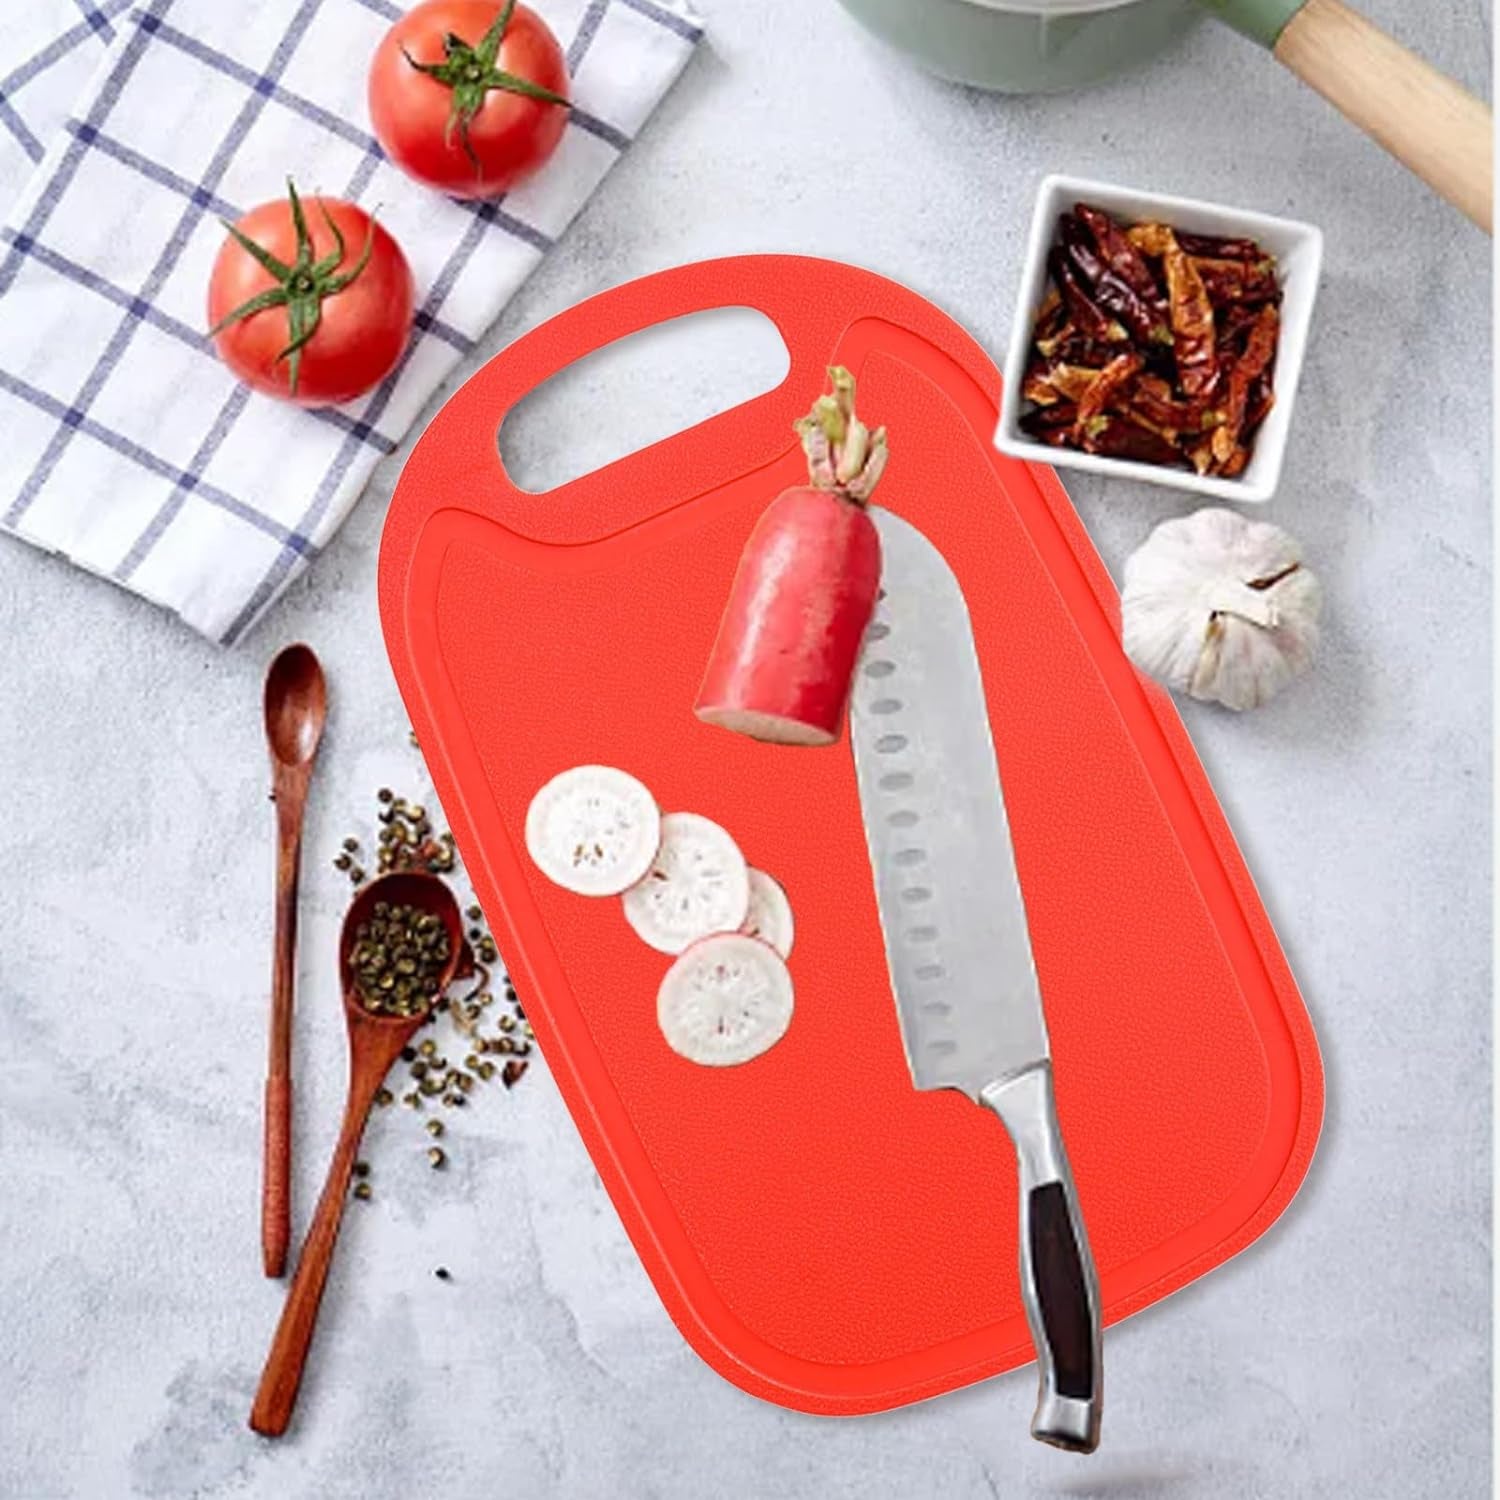 Plastic Cutting Boards for Kitchen Overstock Outlet Dishwasher Safe Double-Sided Design Meat Cutting Board Cutting Board for Meat Easy Grip Handle Non-Slip with Grinding Area Chopping Board  Deal Of The Day Prime Today Only   